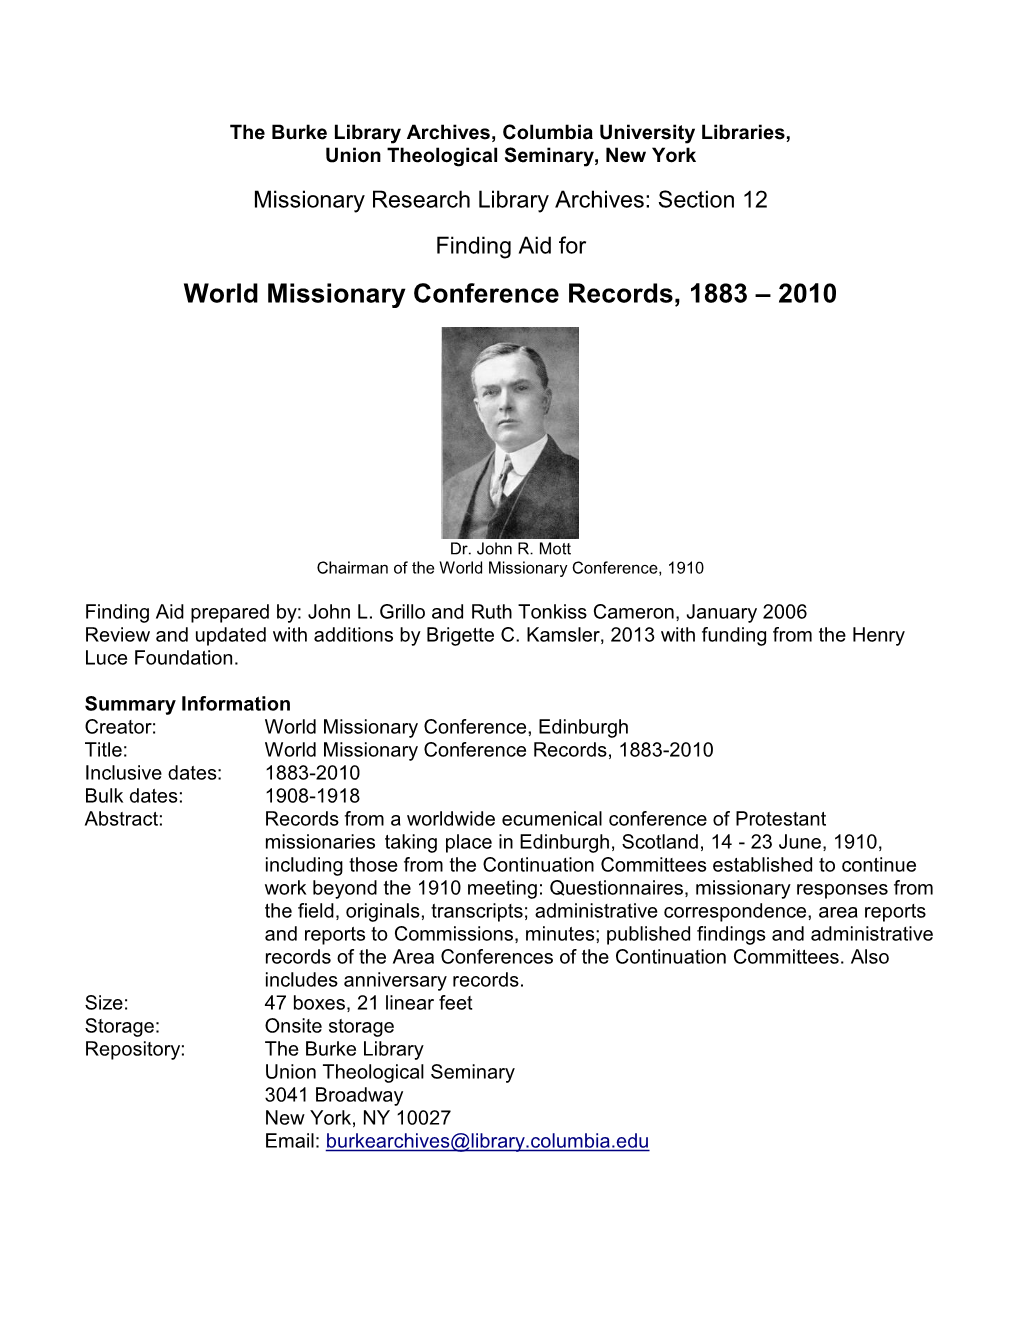 MRL12: World Missionary Conference Records, 1883-2010